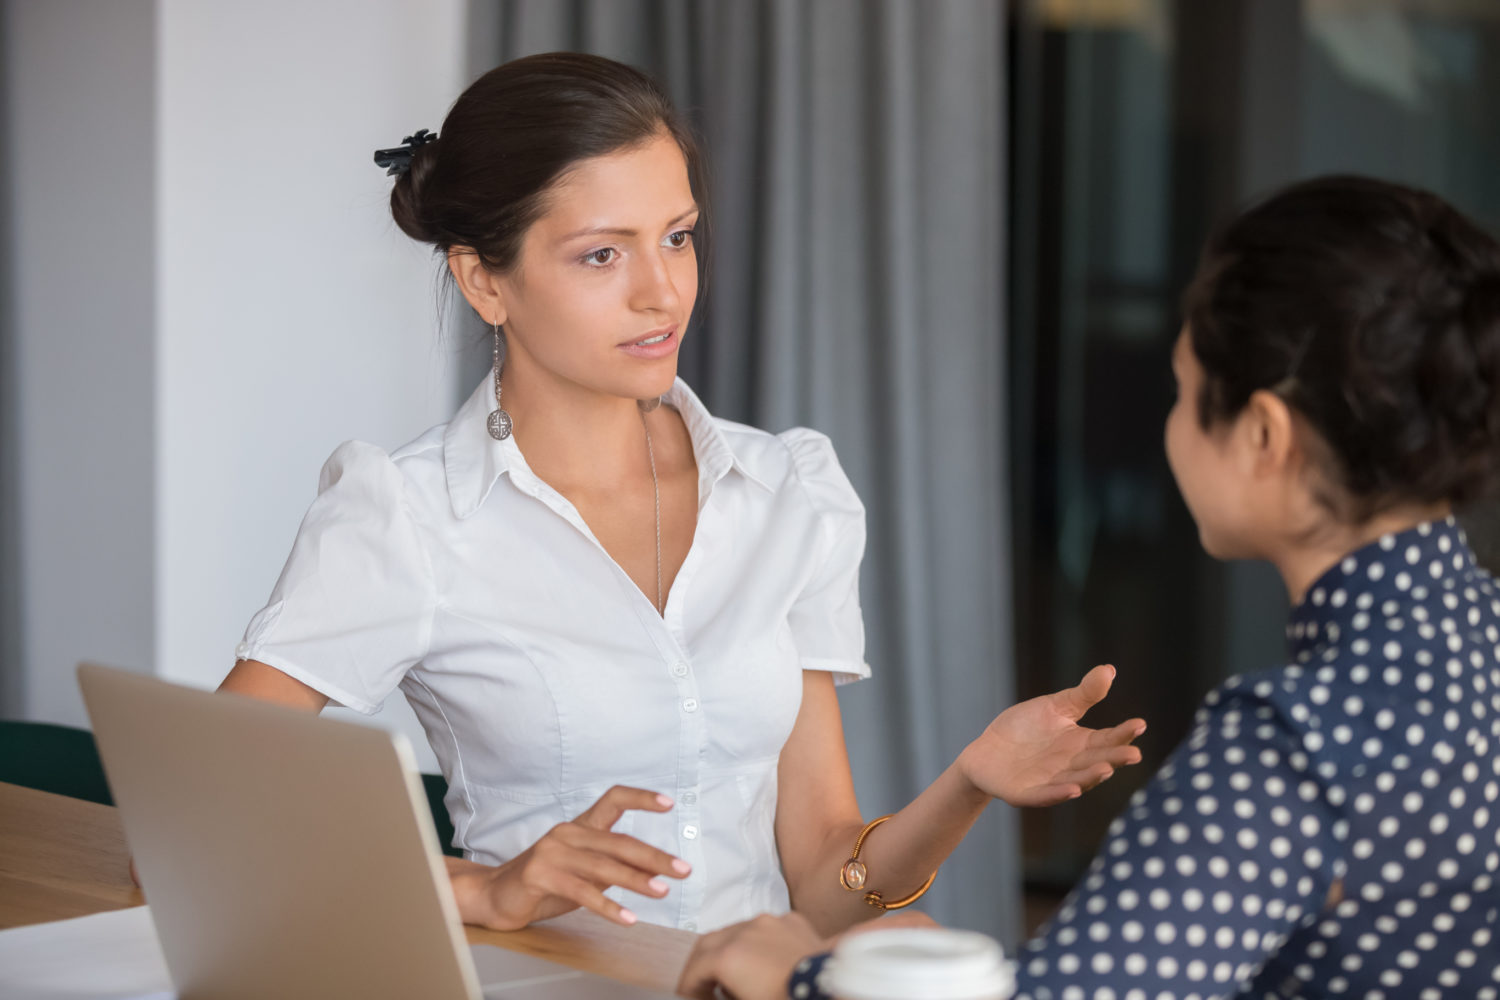 Female manager talking to employee with serious expression